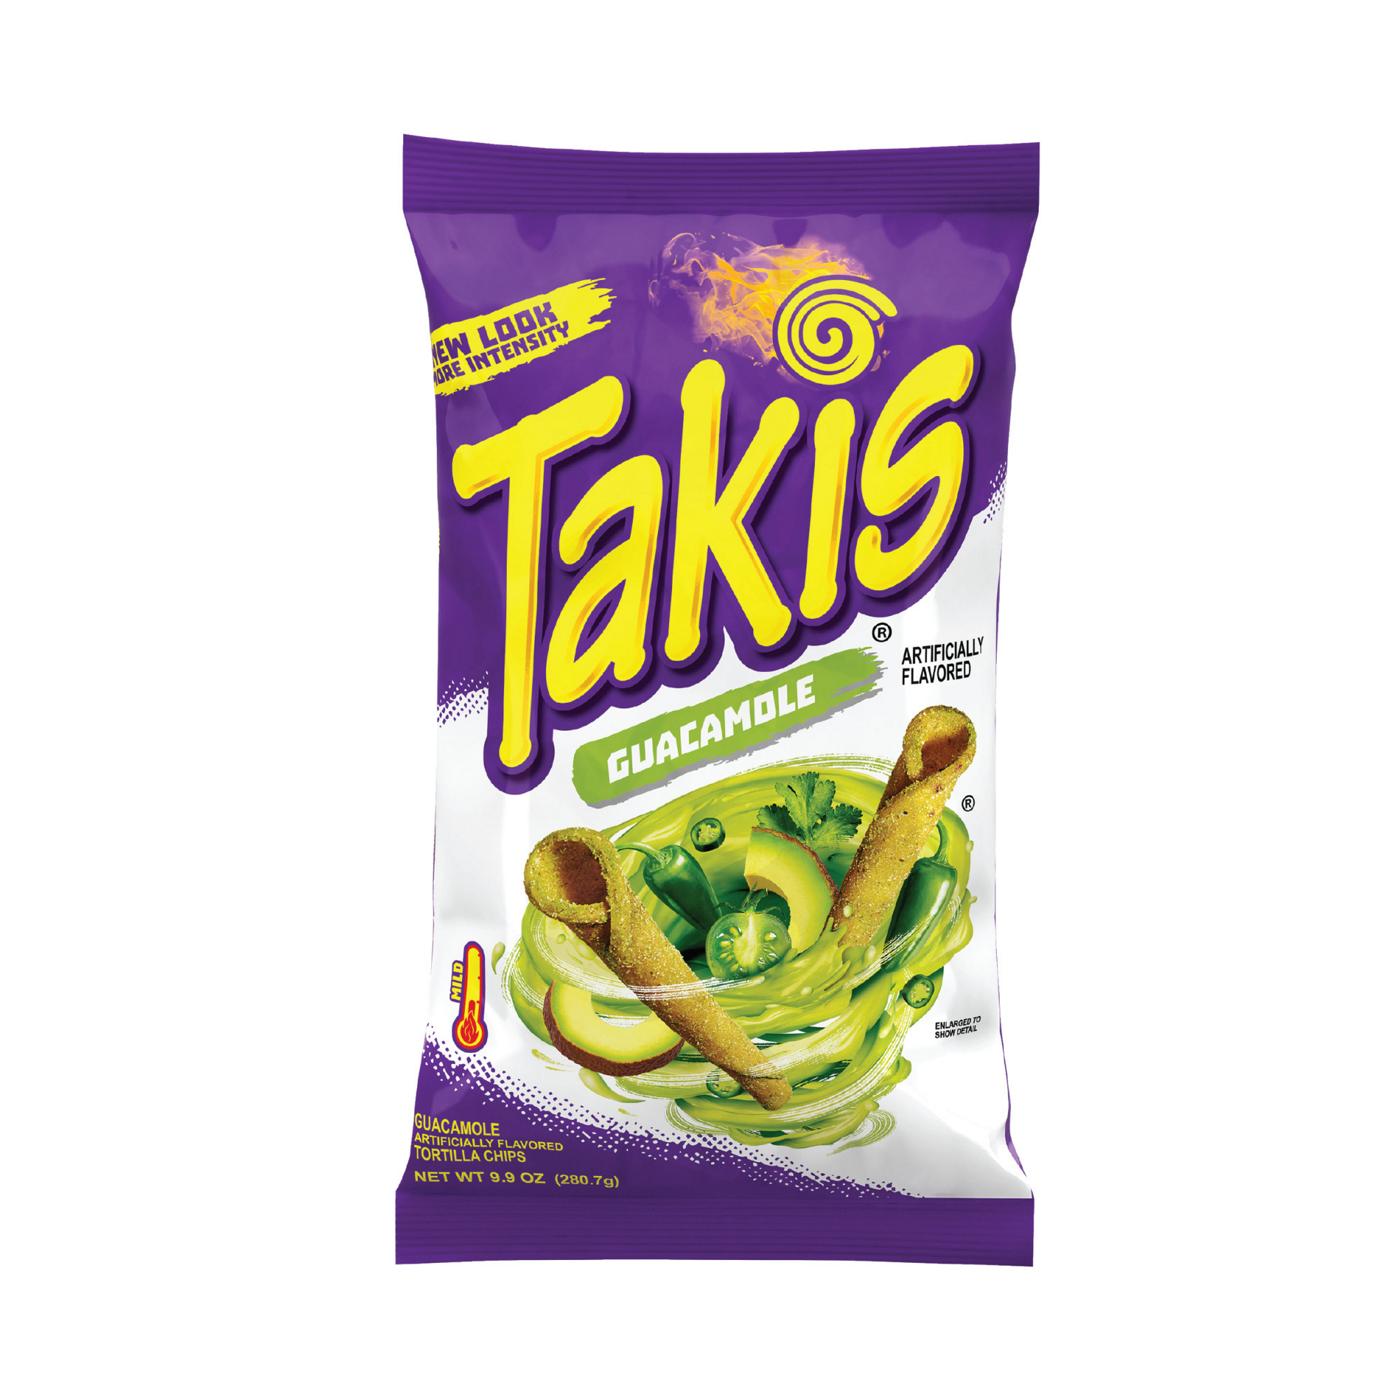 Takis Guacamole Rolled Tortilla Chips; image 1 of 7